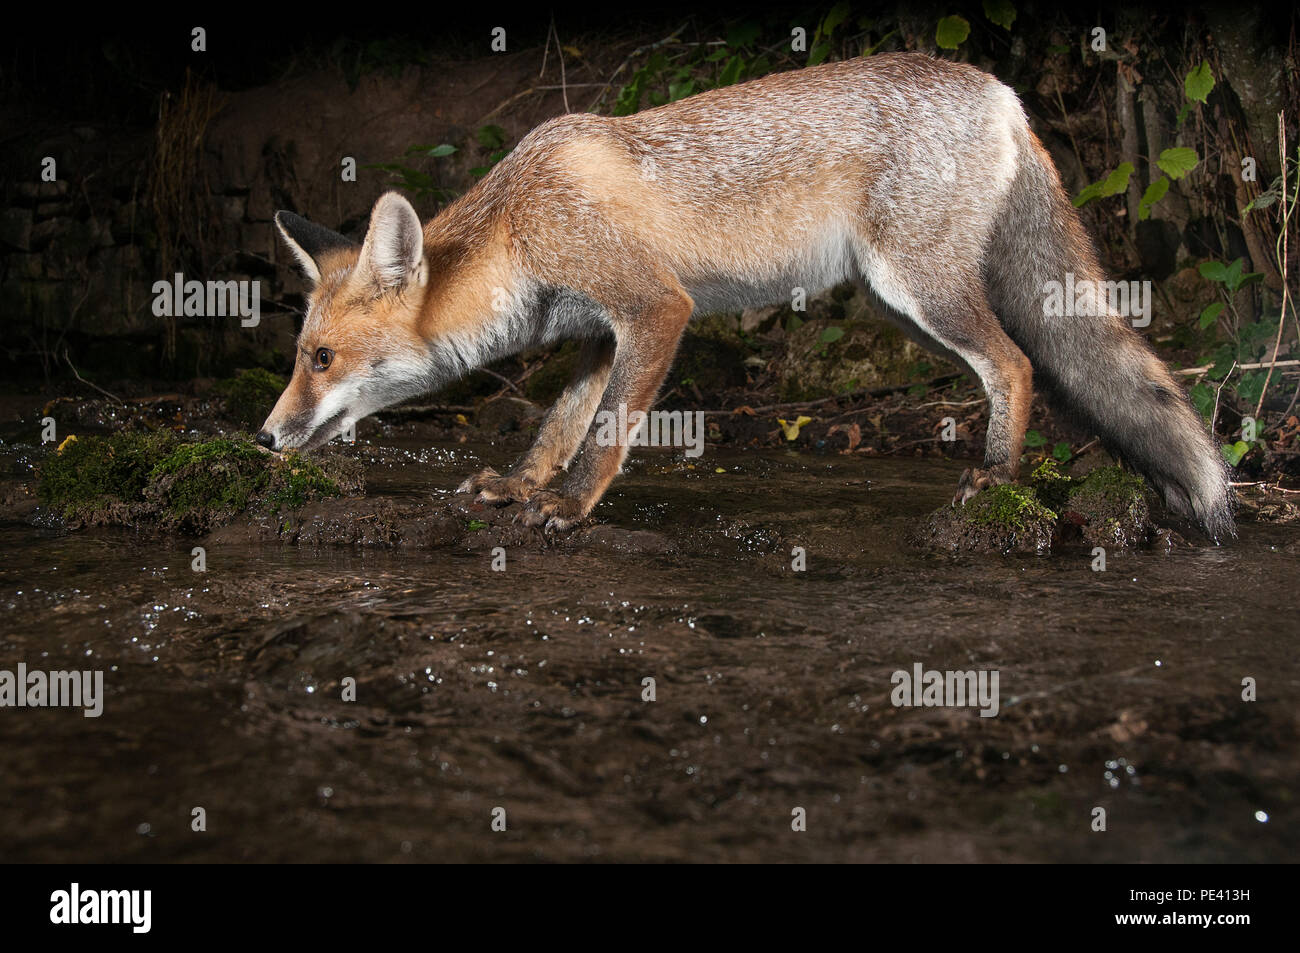 Fox, vulpes vulpes, drinking water with reflection Stock Photo